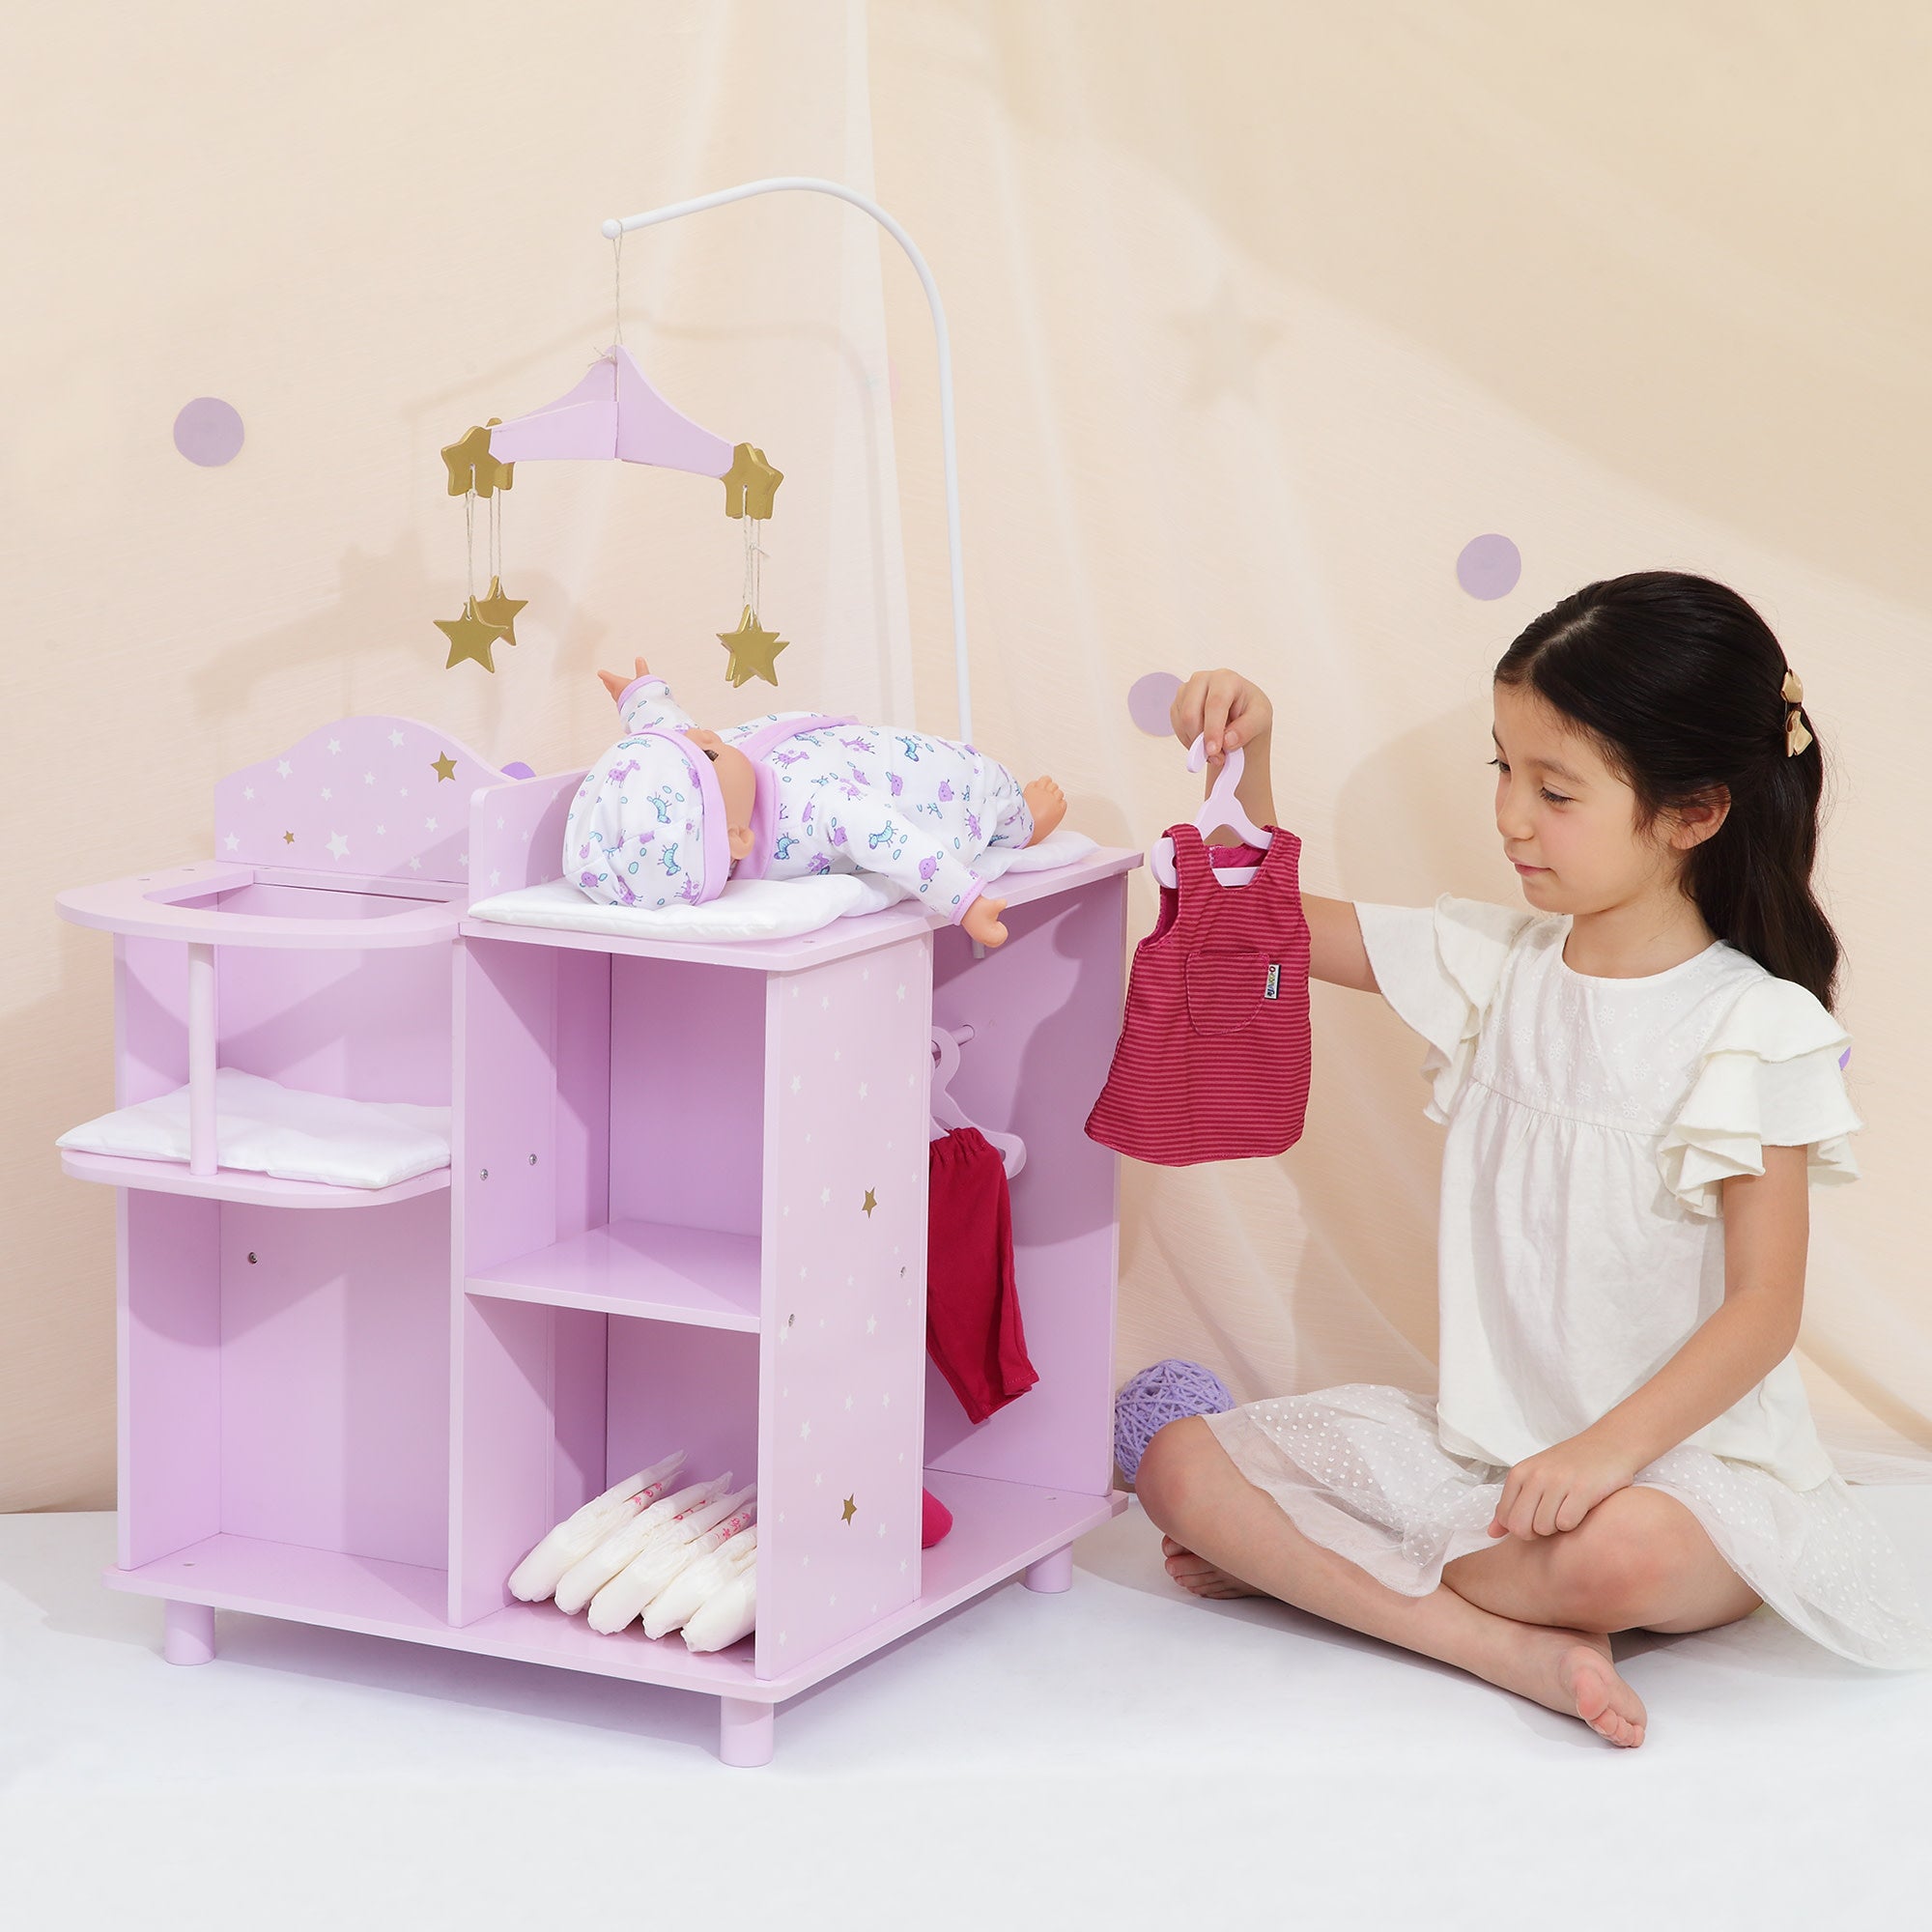 Olivia's Little World Twinkle Stars Princess 4-in-1 Baby Doll Furniture